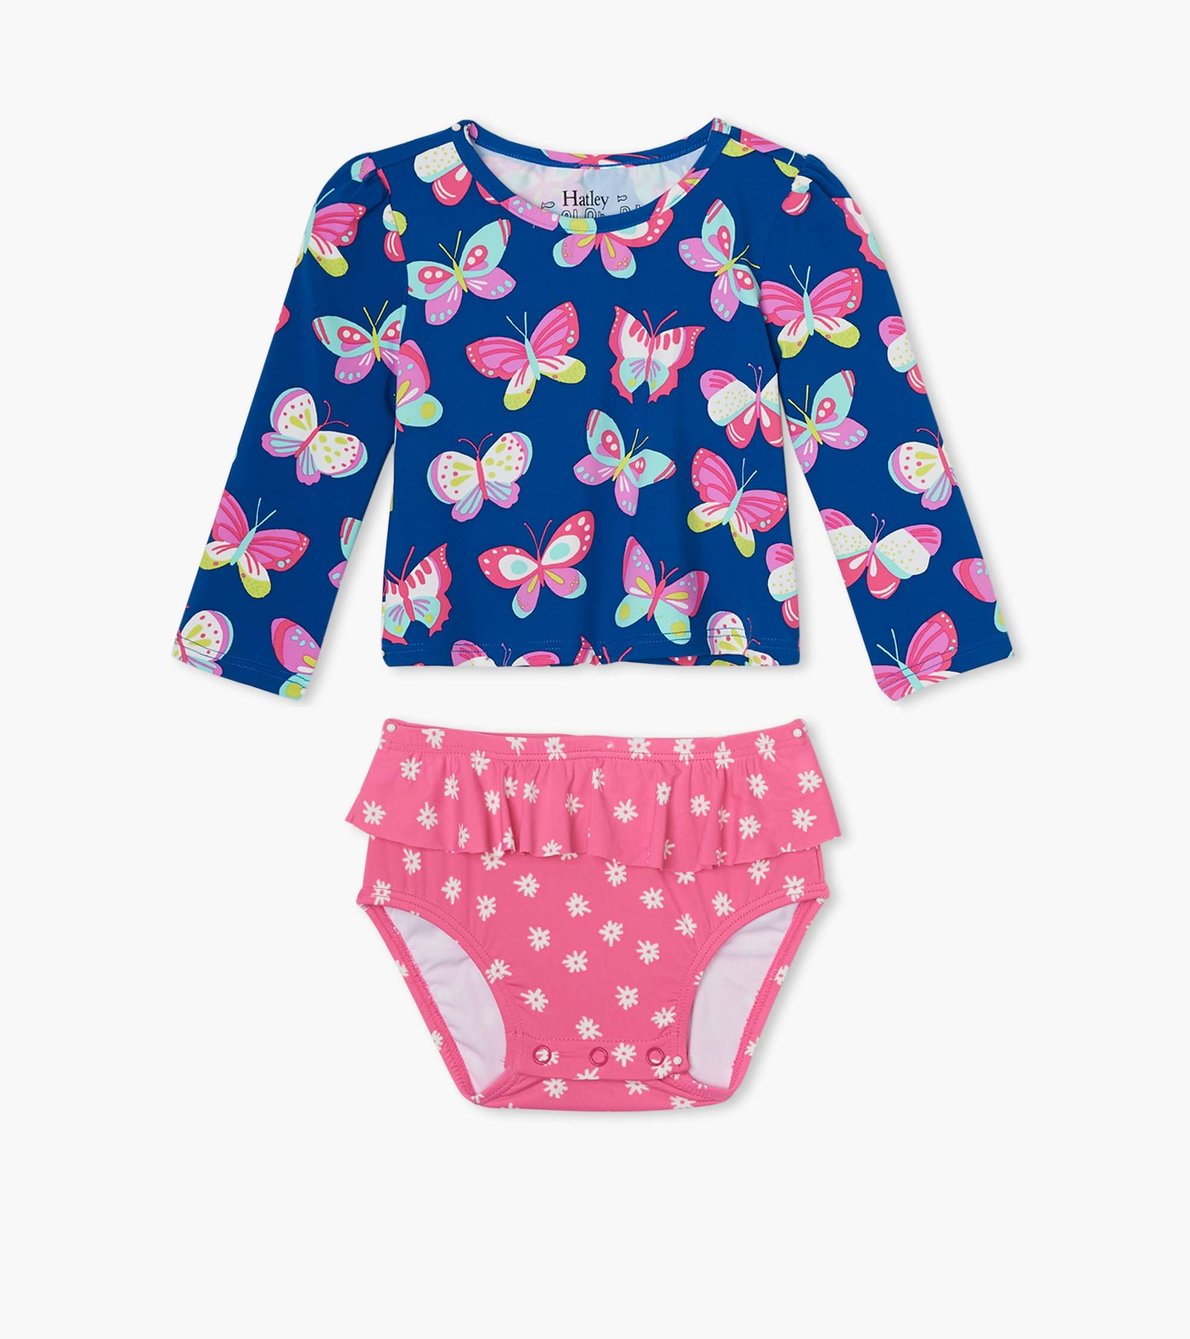 View larger image of Bright Butterflies Baby Rashguard Set